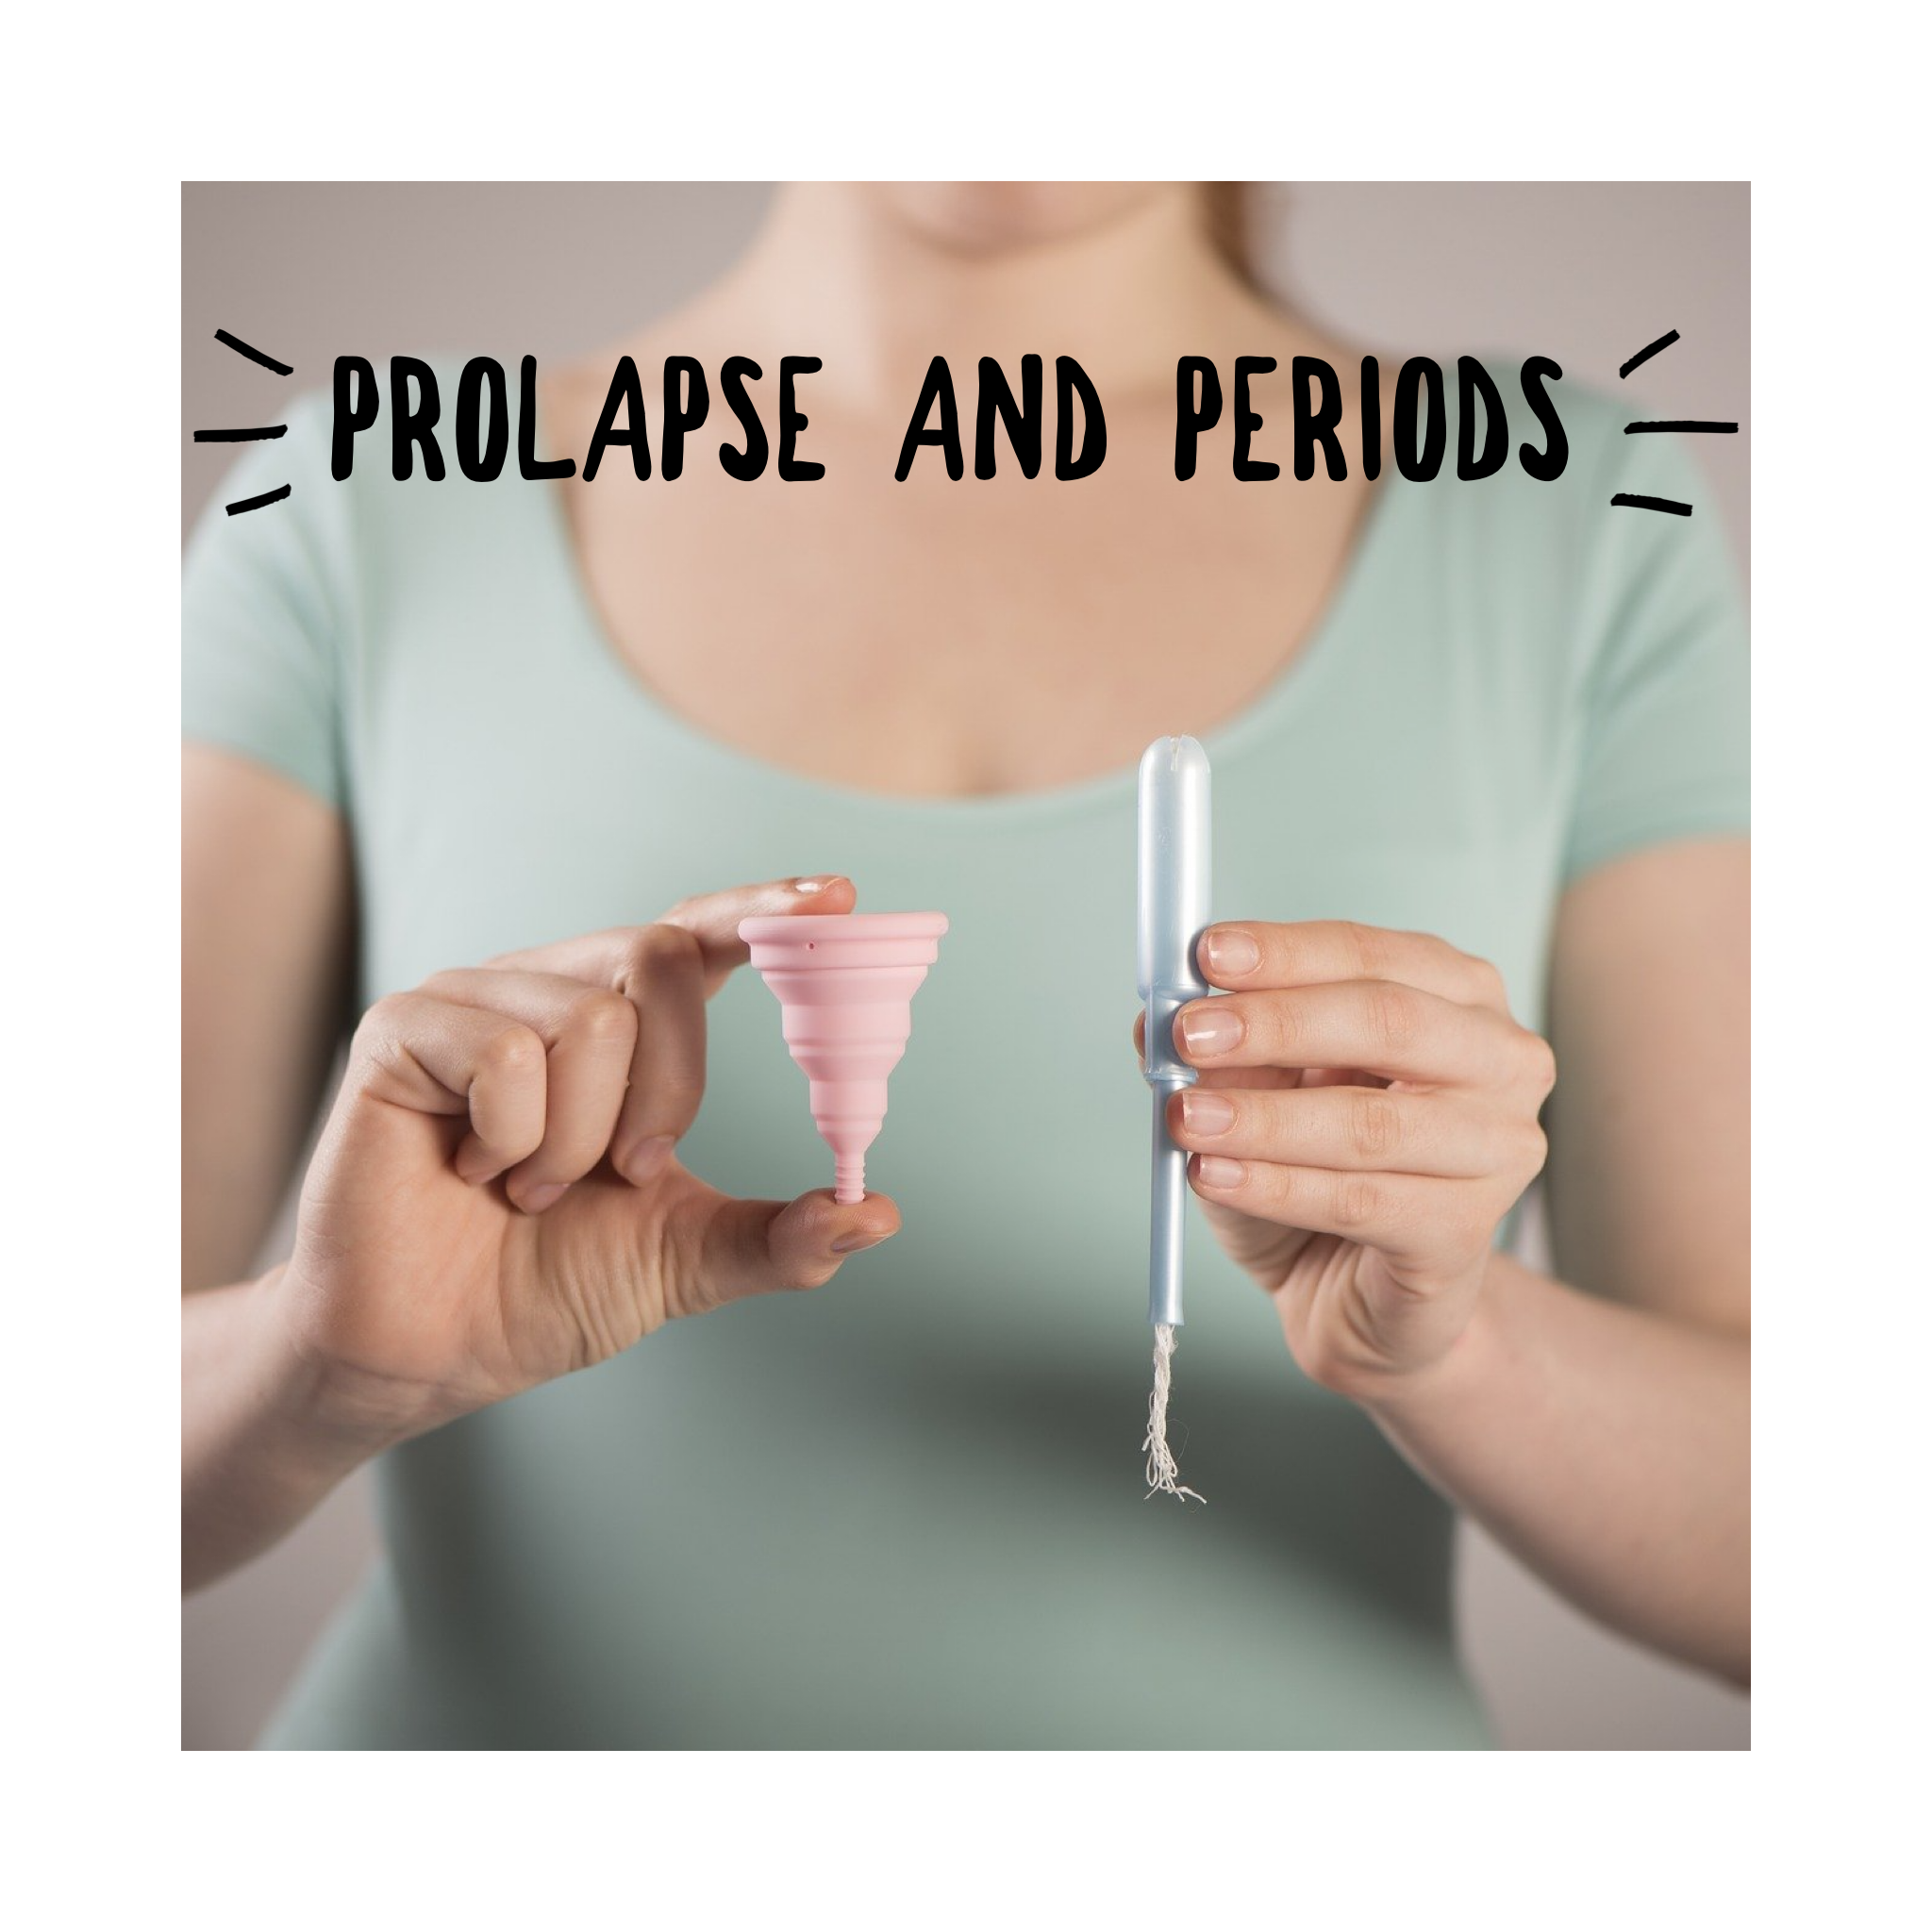 Prolapse and Periods, lets talk about it... pic image